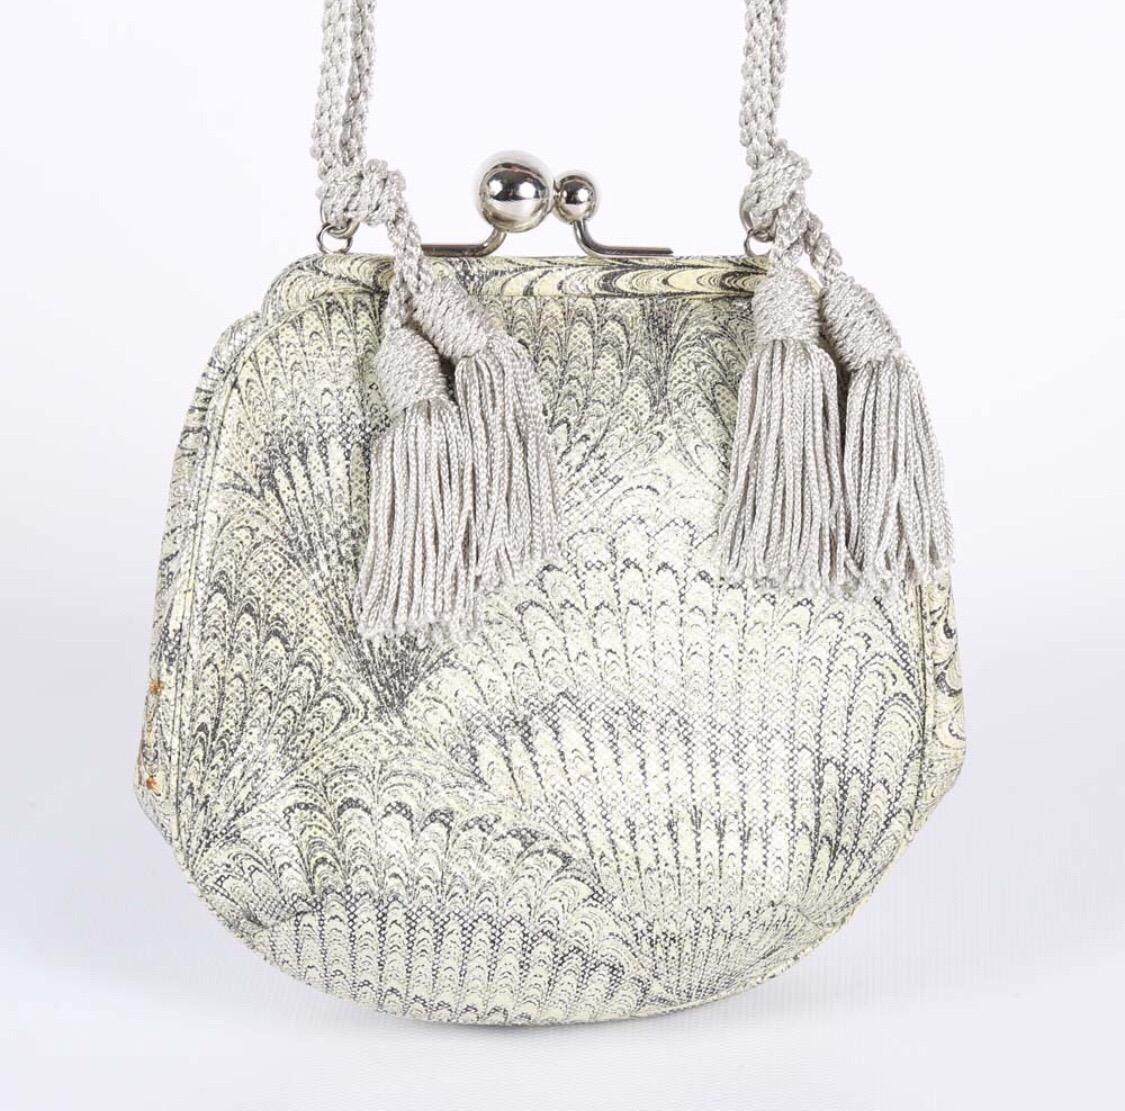 A vintage Judith Leiber minaudière. This compact purse is constructed of marbled painted lizard skin and features a decorative, silver tone kiss clasp, and a double woven shoulder strap with tassels. The interior is lined in silver satin and